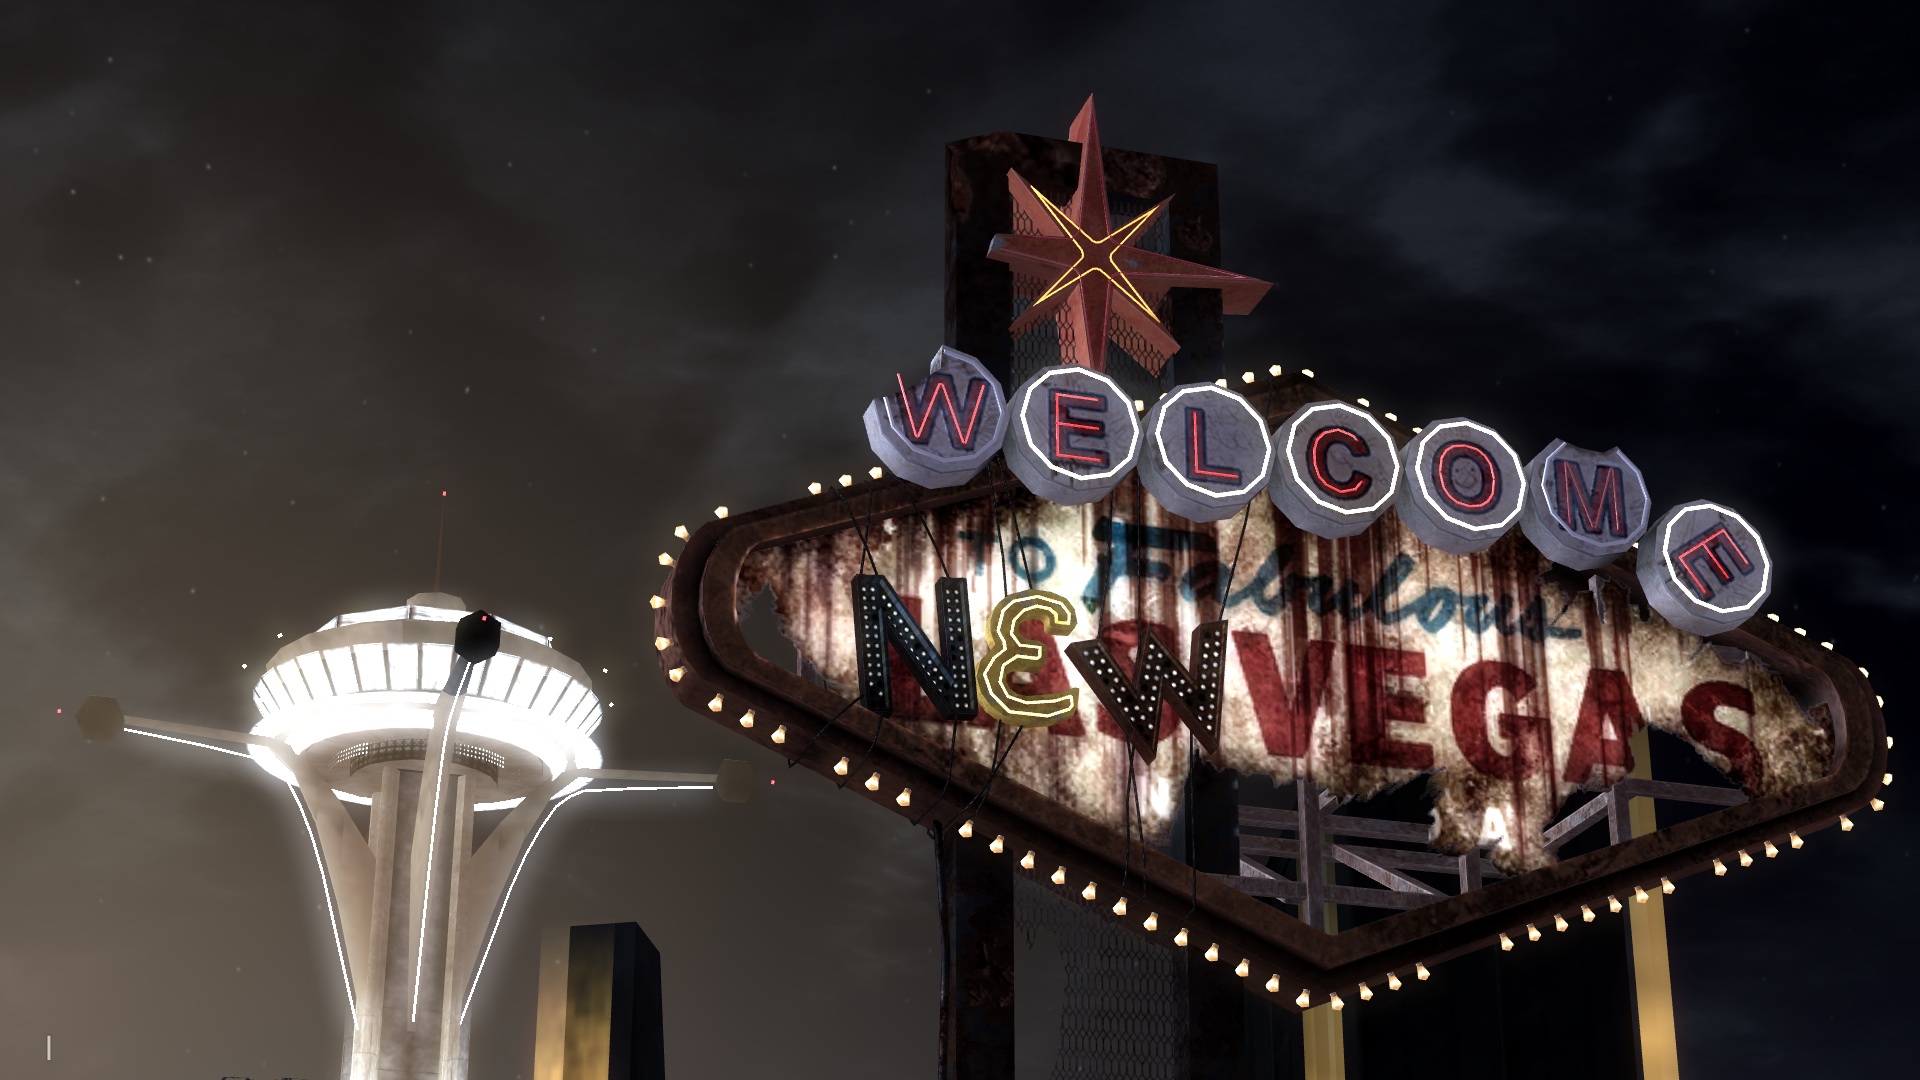 "Welcome to New Vegas" sign and the Lucky 38